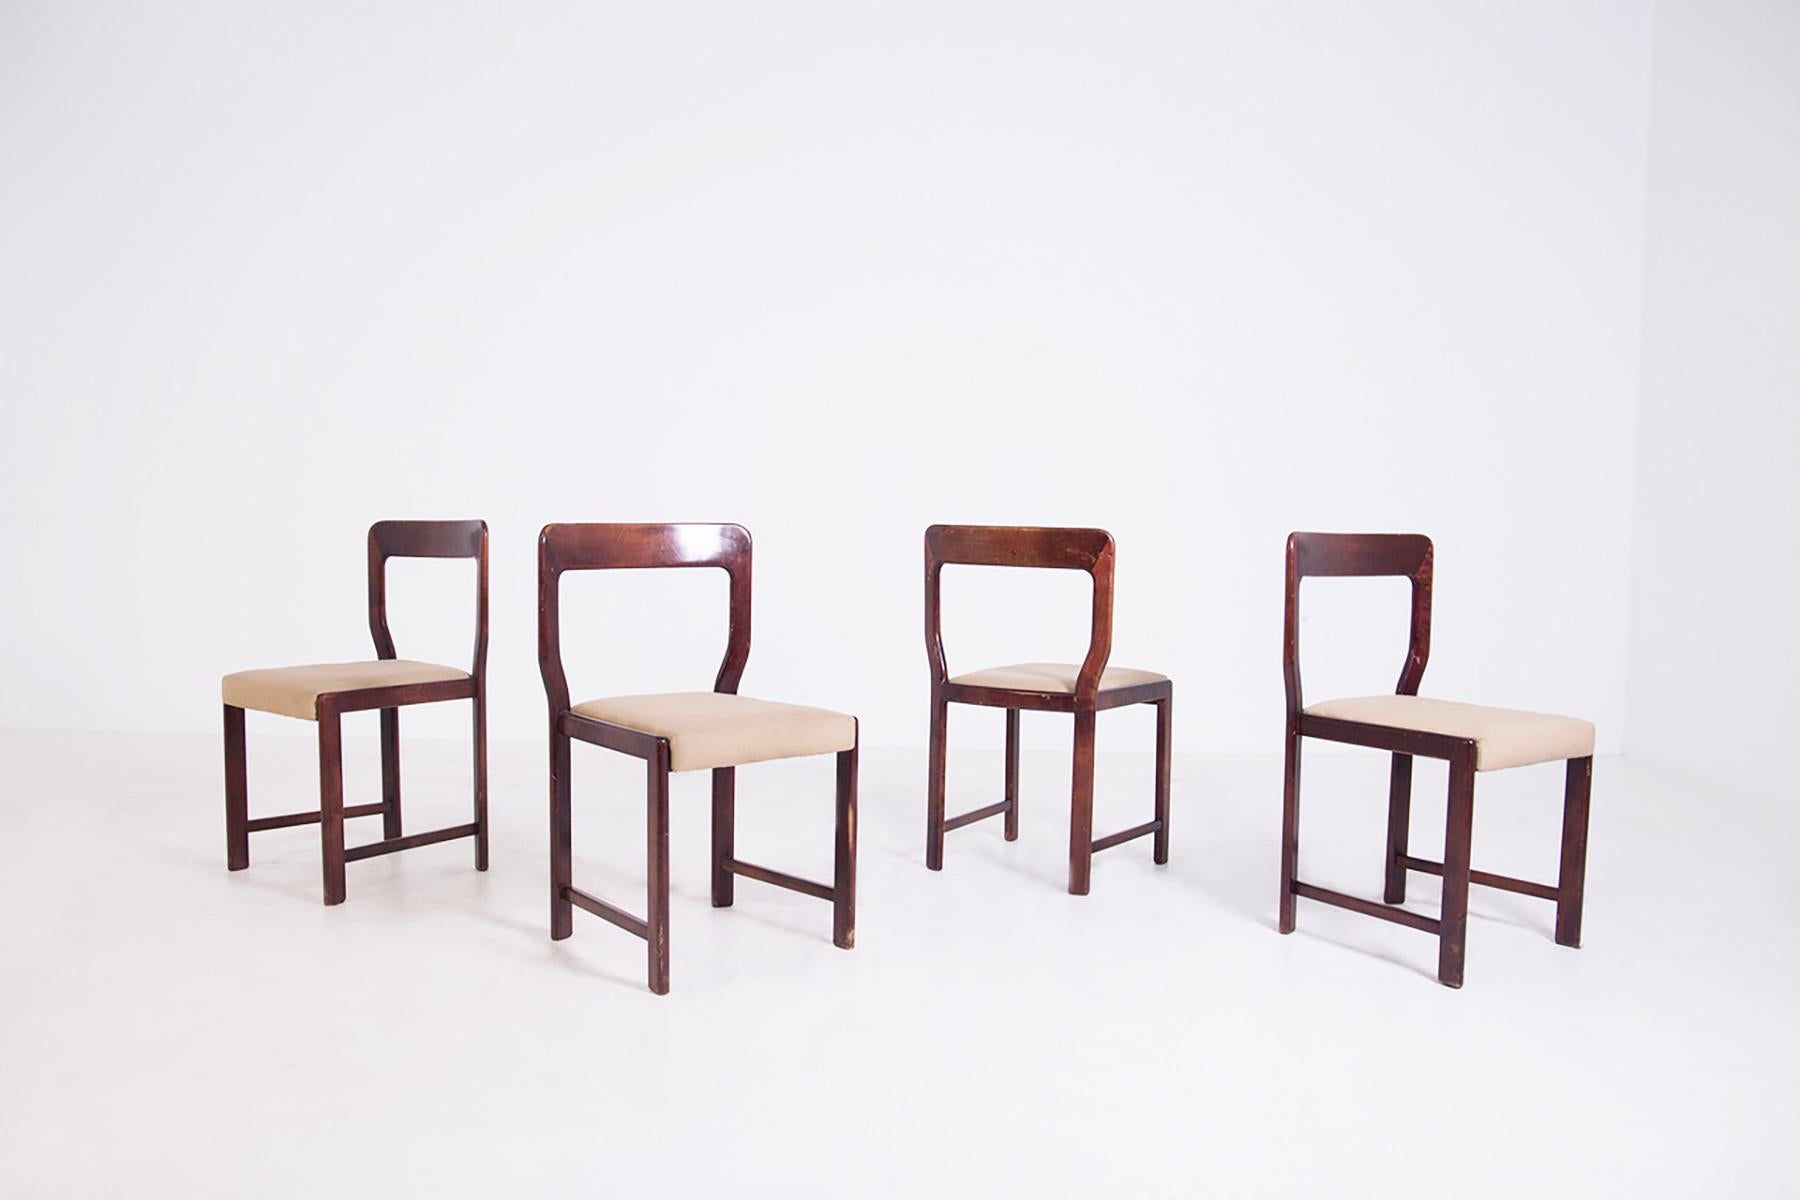 Beautiful set composed of four chairs by Mario Sabot from 1960.
Mario Sabot chair set is in its original condition. The frame is made of fine mahogany wood, and the back is slightly curved. The seat of chairs is made of fine cotton of the time in